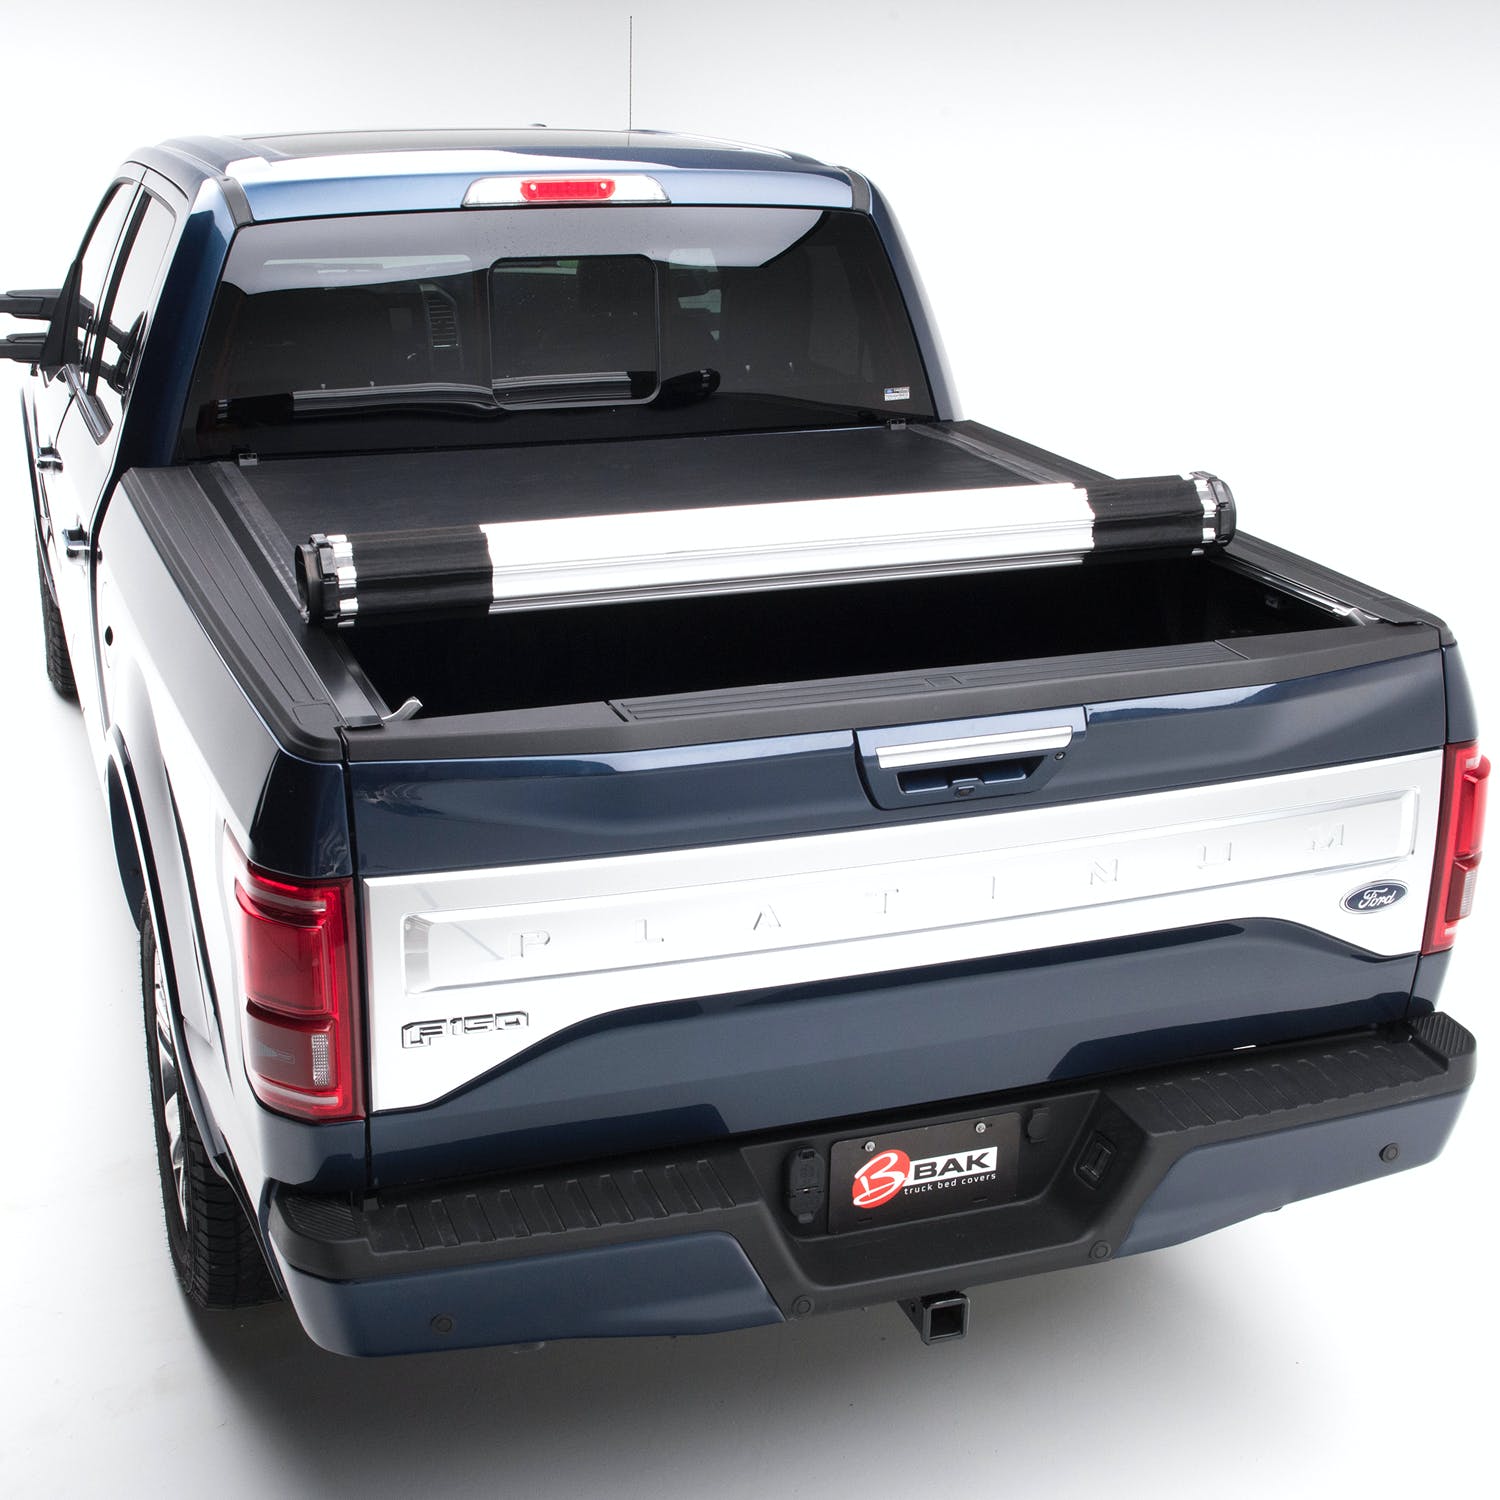 BAK Industries 39304 Revolver X2 Hard Rolling Truck Bed Cover